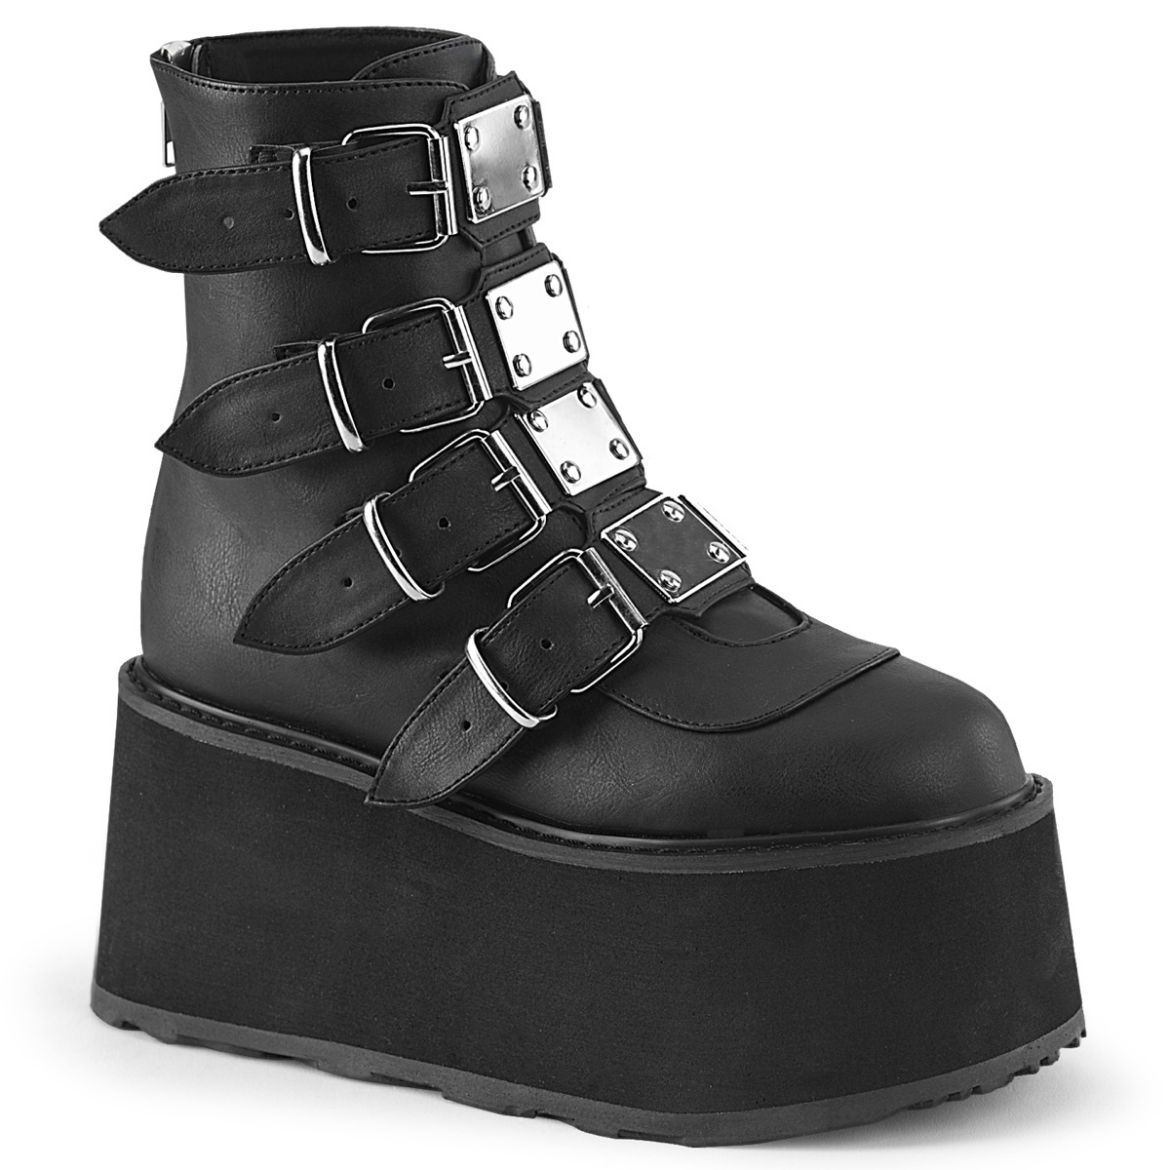 Product image of Demonia DAMNED-105 Blk Vegan Leather 3 1/2 Inch PF Ankle Bootw/ 4 Buckle Straps Back MetalZip